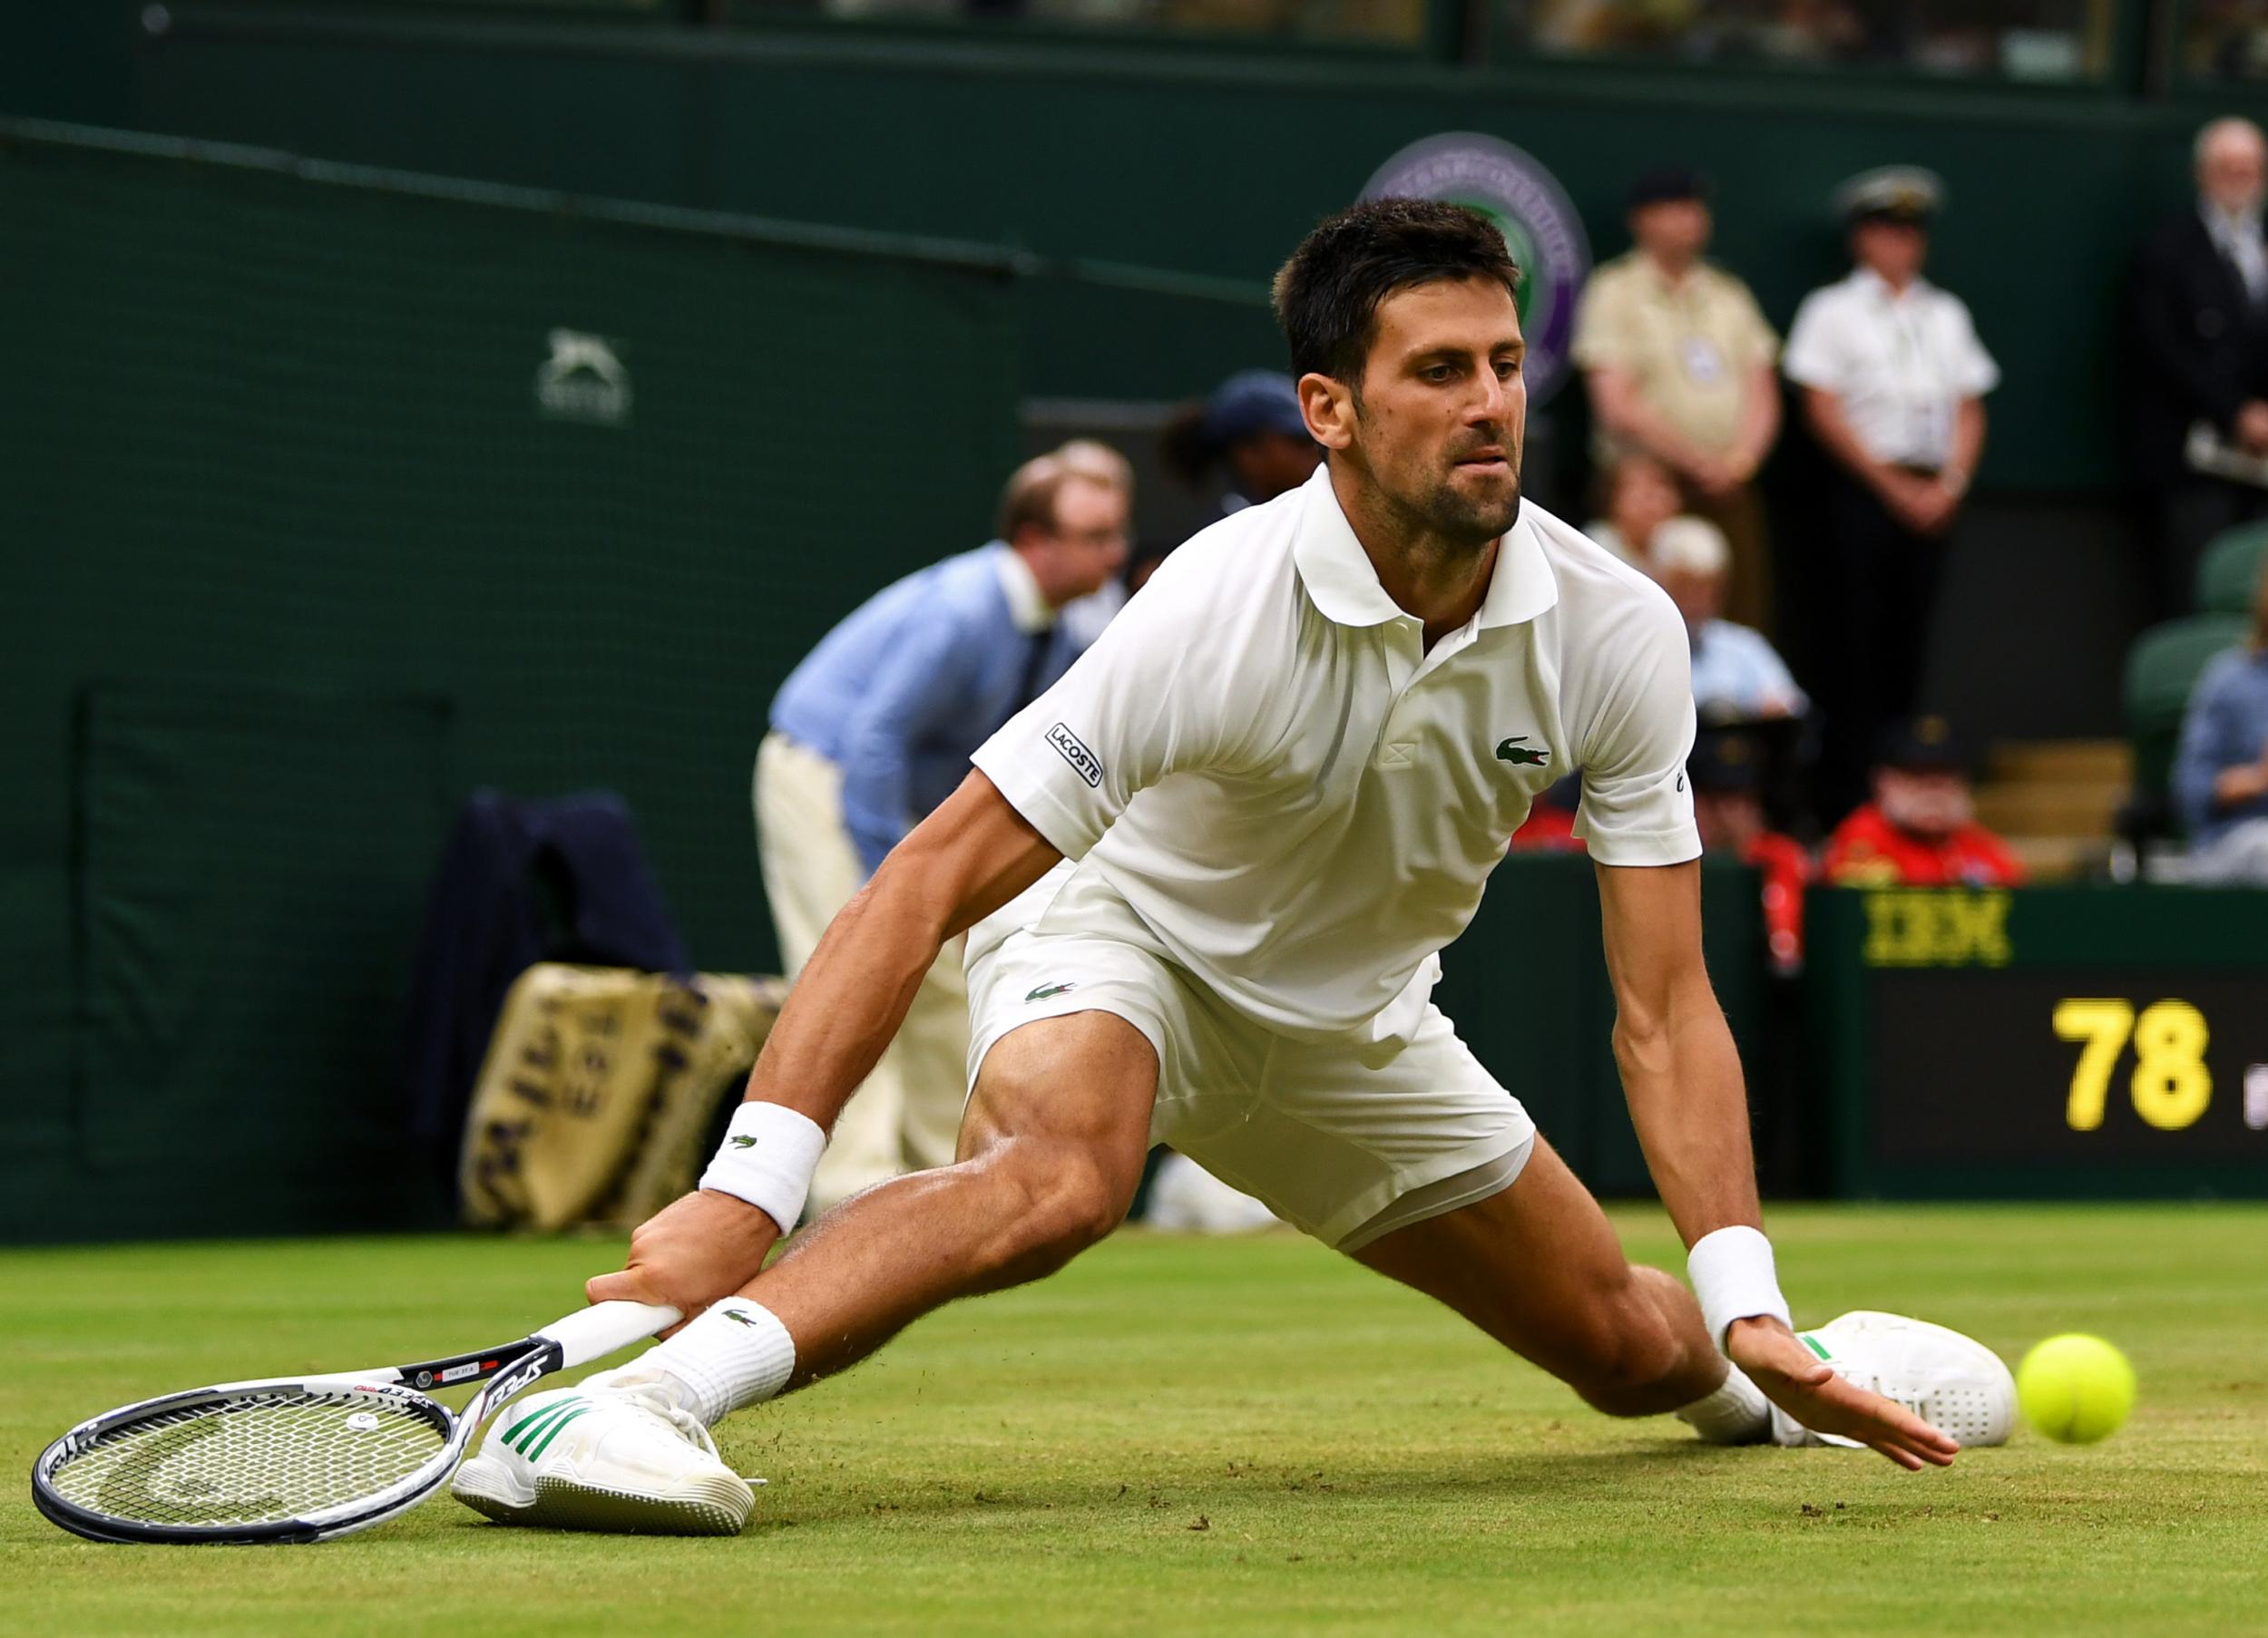 Djokovic frequently complained to the umpire about the state of the playing surface